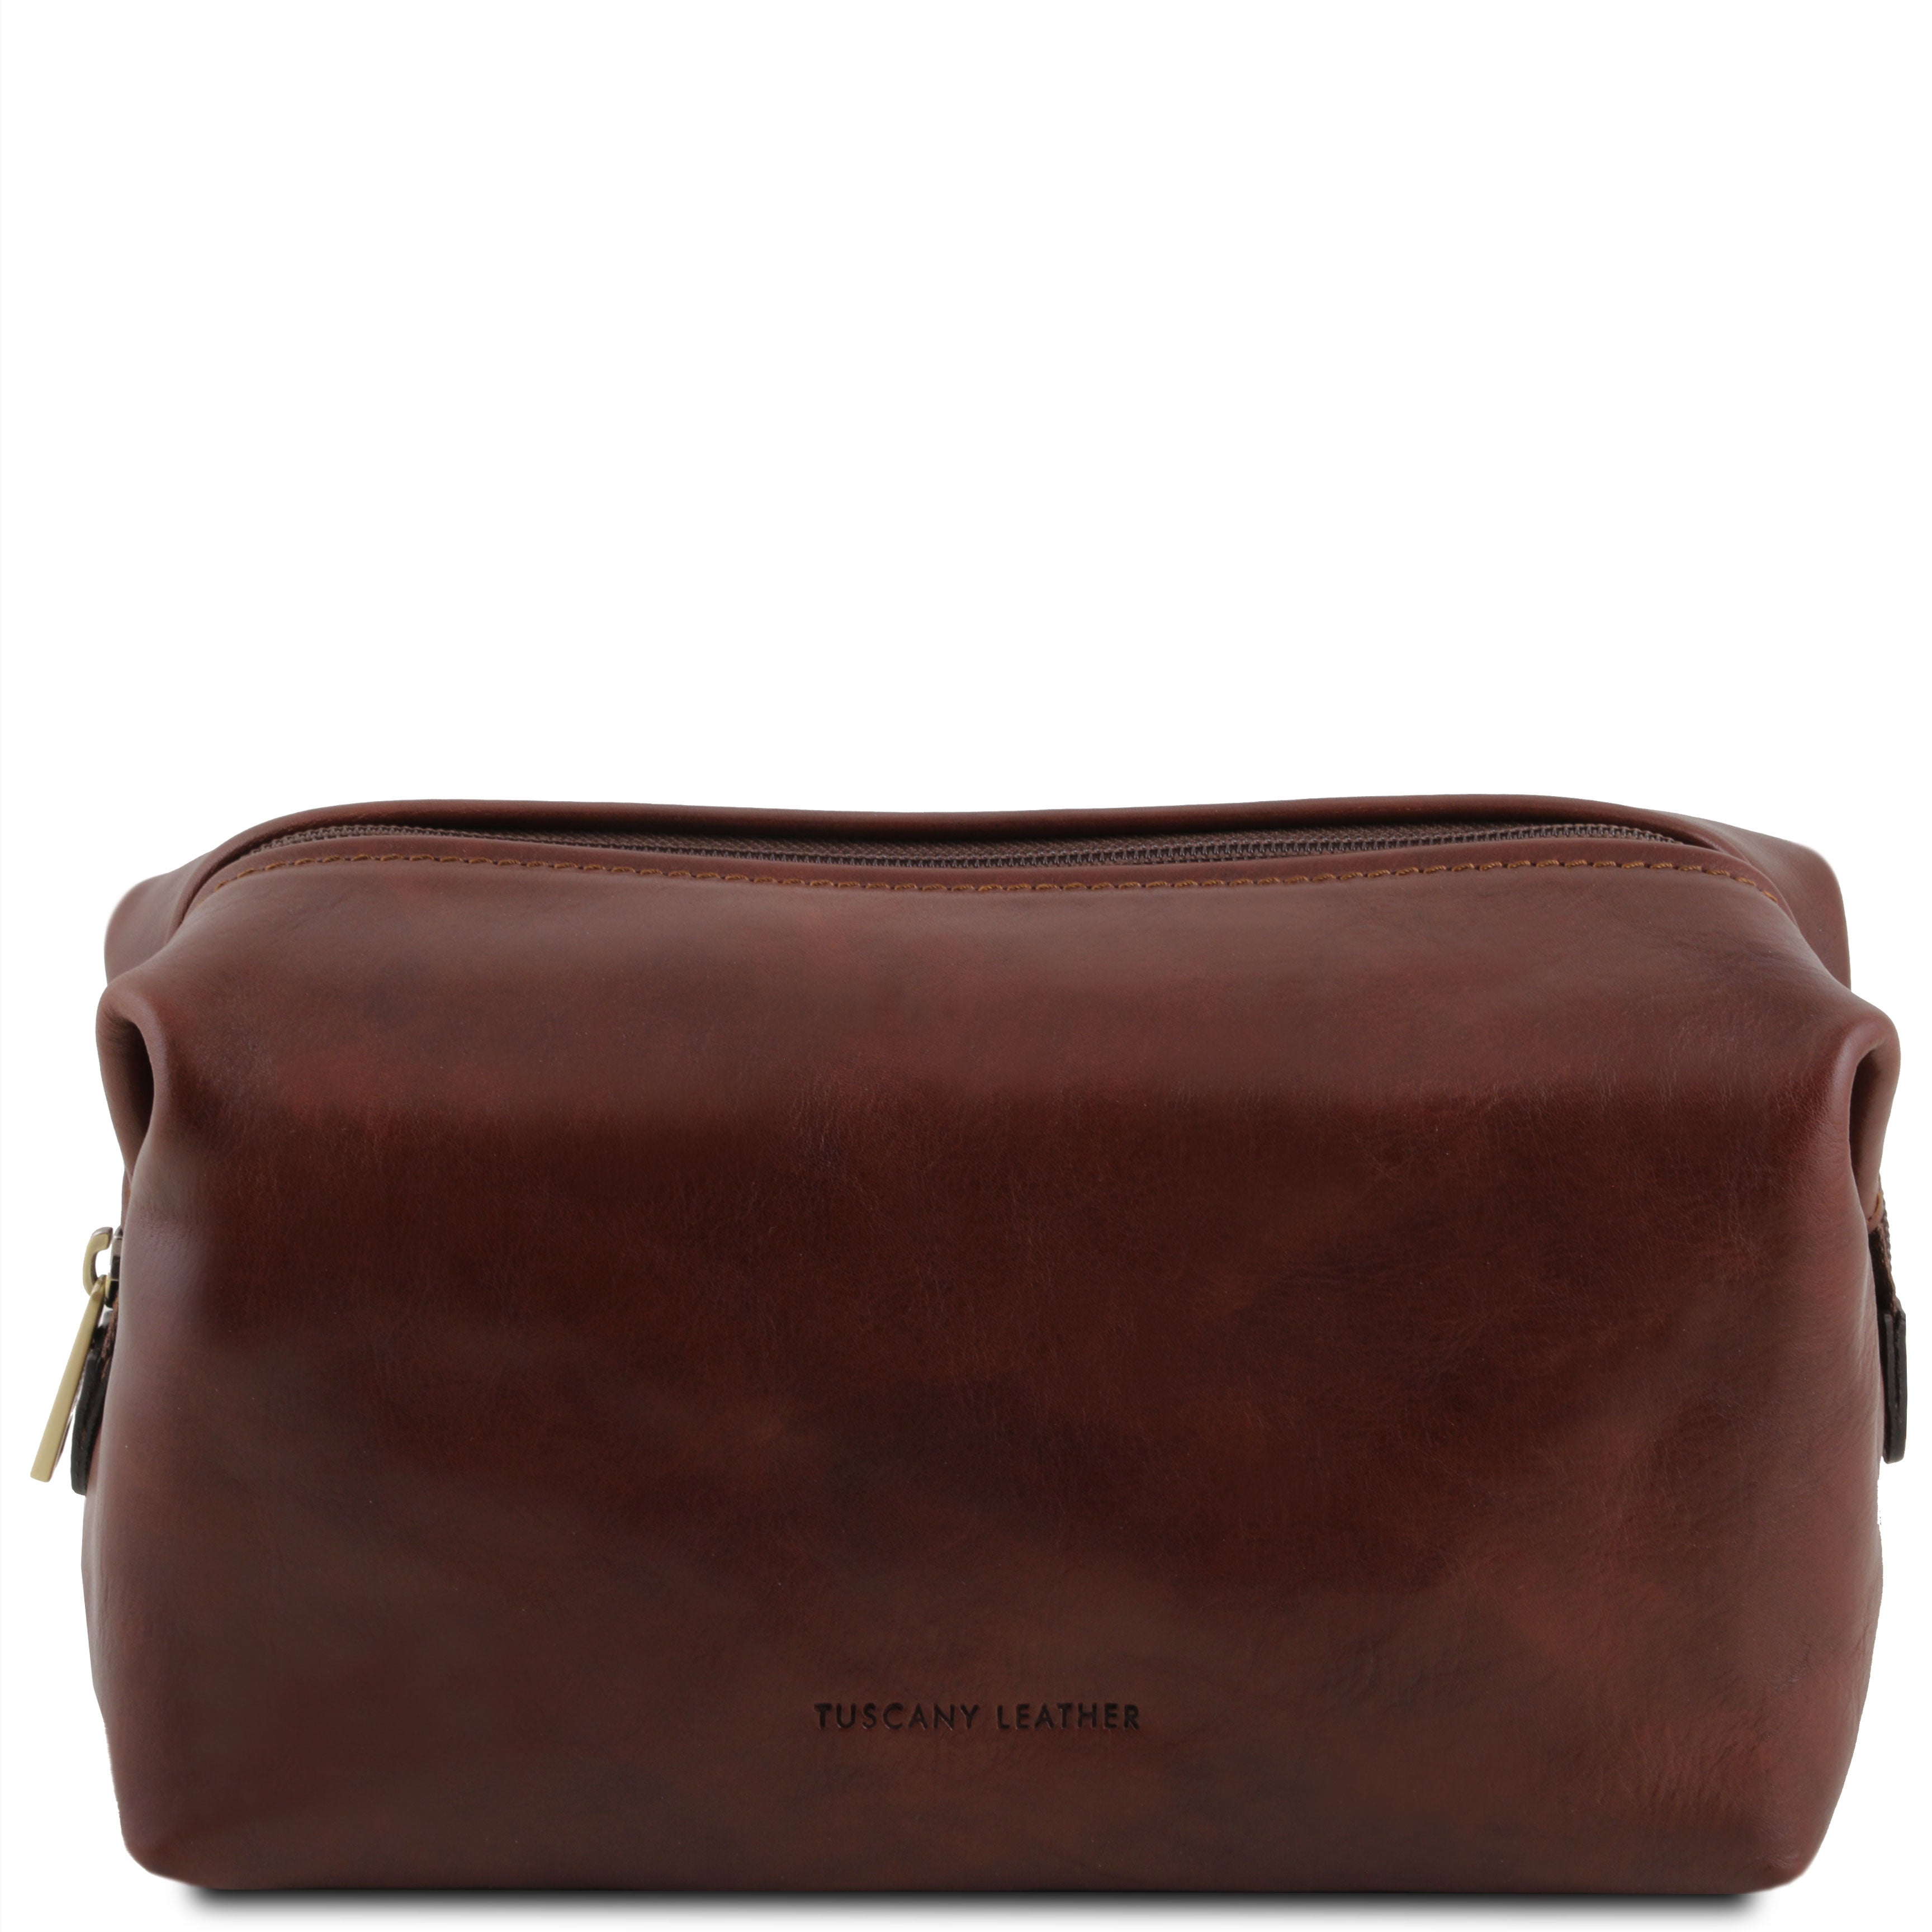 Large brown leather toiletry bag⎪ Tuscany Leather